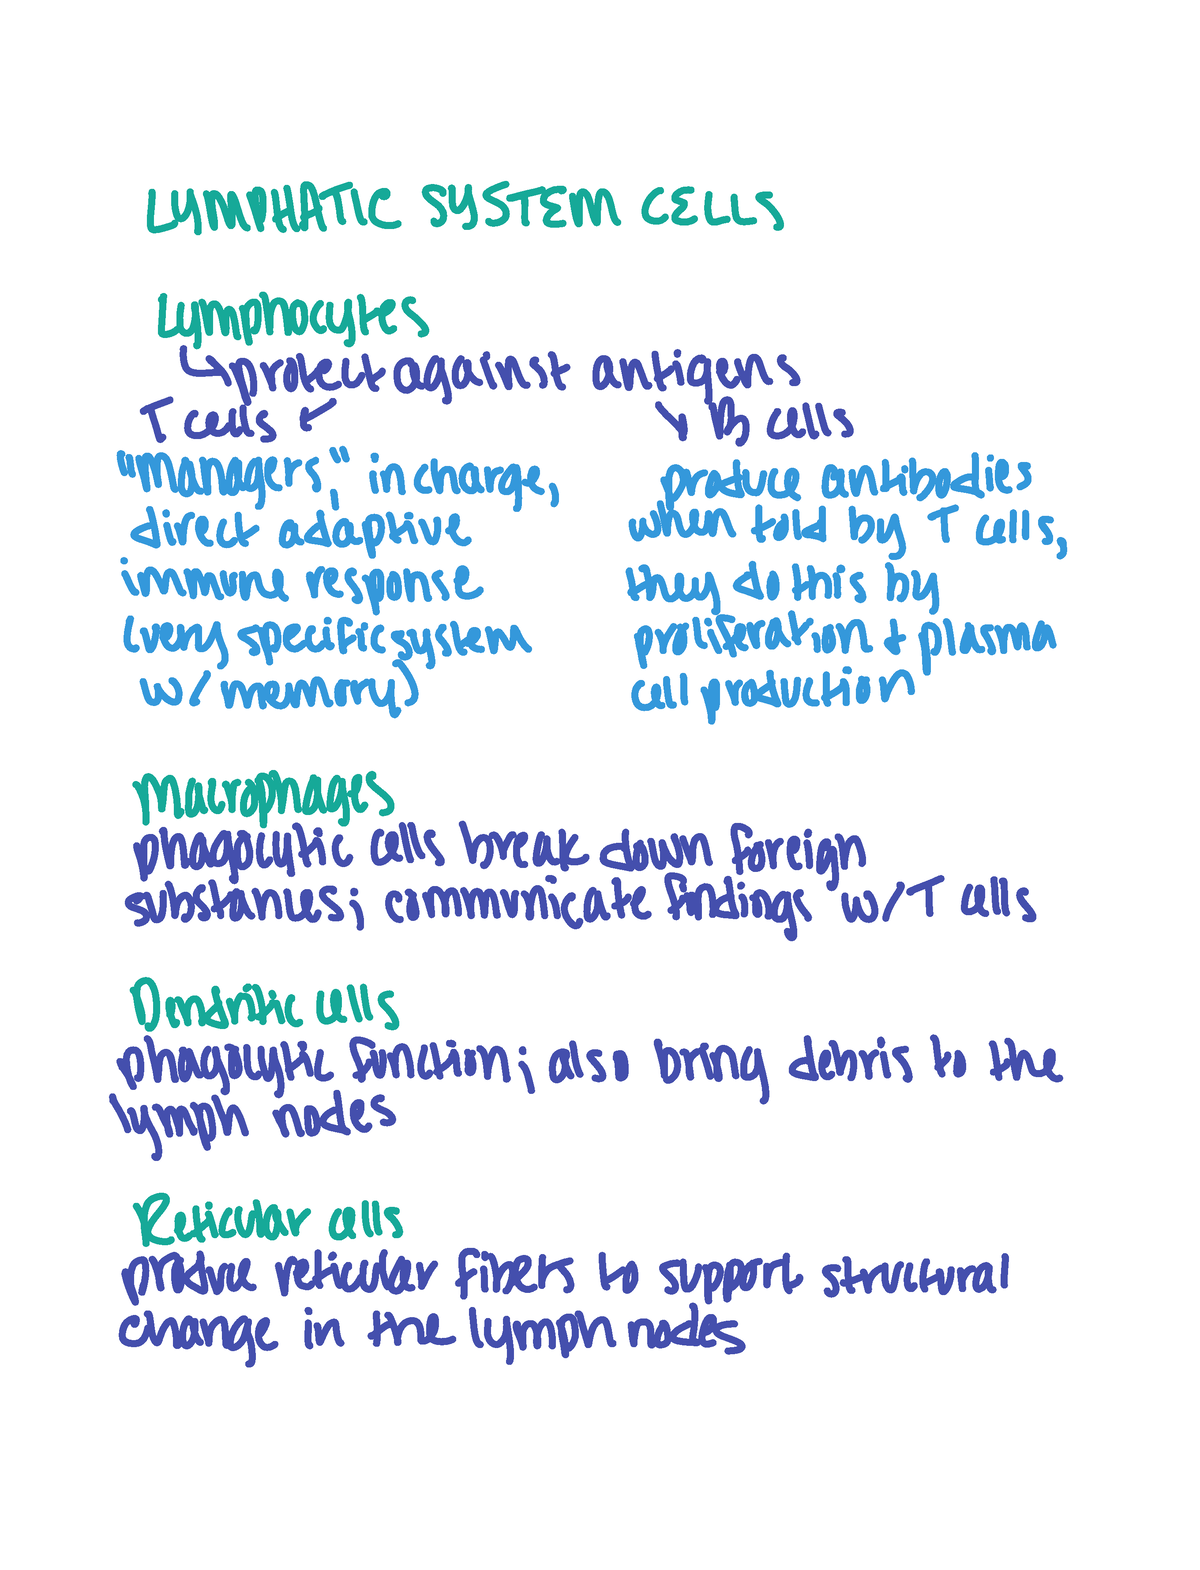 Lymphatic System Notes - LYMPHATIC SYSTEM CELLS Lymphocytes protect ...